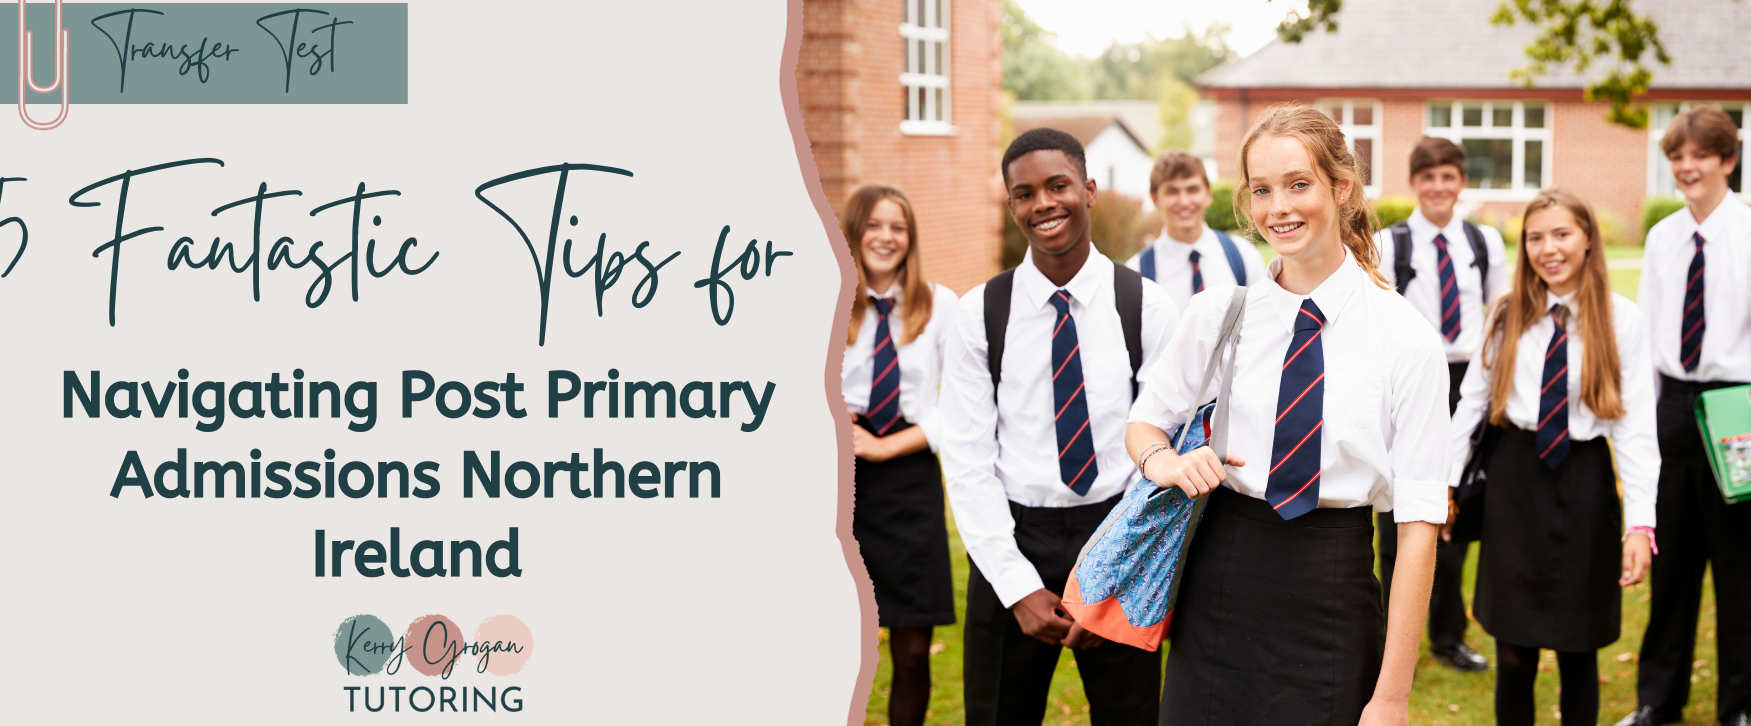 5 Fantastic Tips for Navigating Post Primary Admissions Northern Ireland